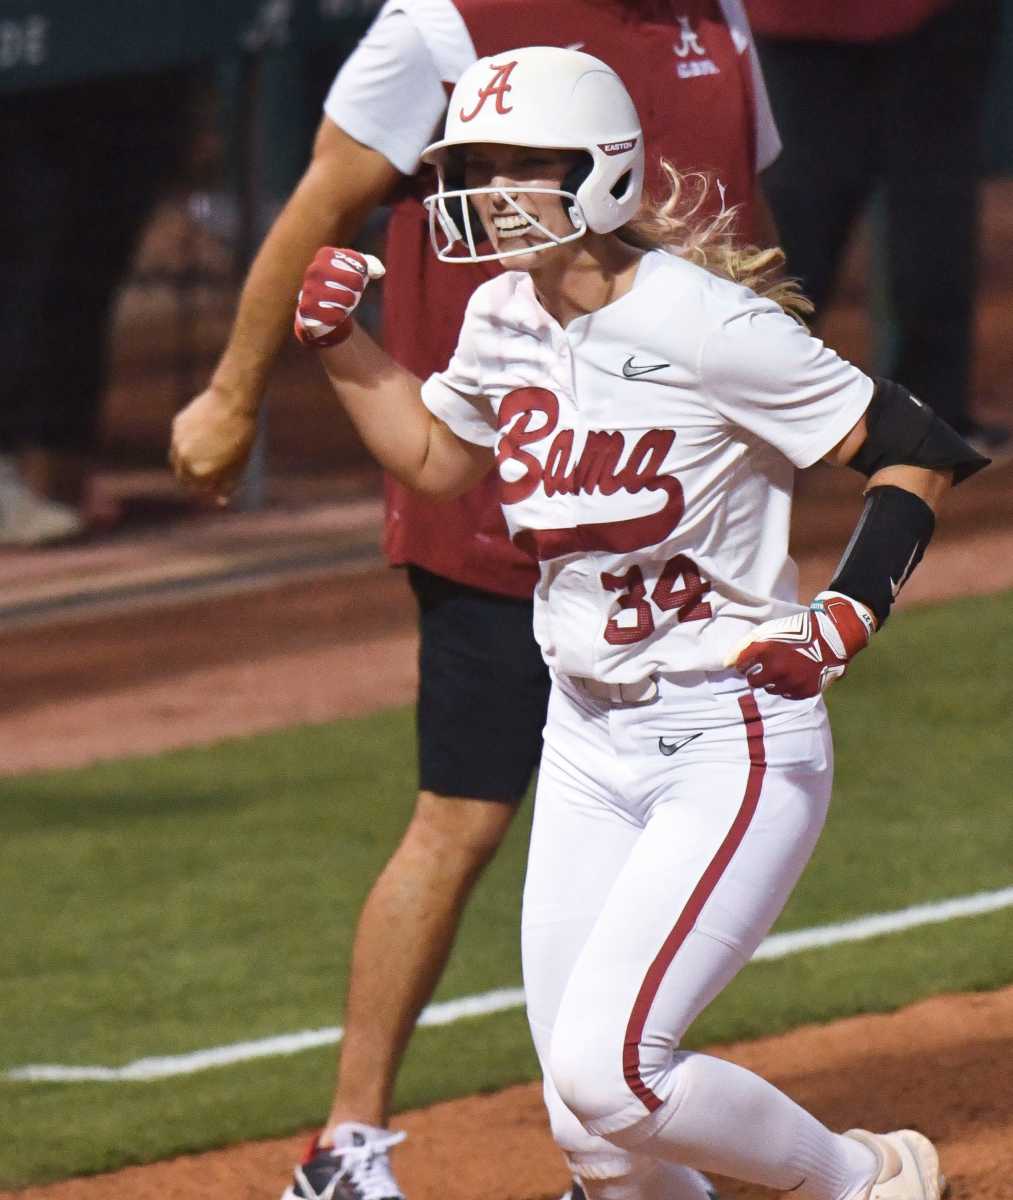 Alabama batter Ally Shipman (34) celebrates as she rounds third after hitting a two-run homer against Long Island University Friday, May 19, 2023, at Rhoads Stadium in the Tuscaloosa Regional of the NCAA Tournament.